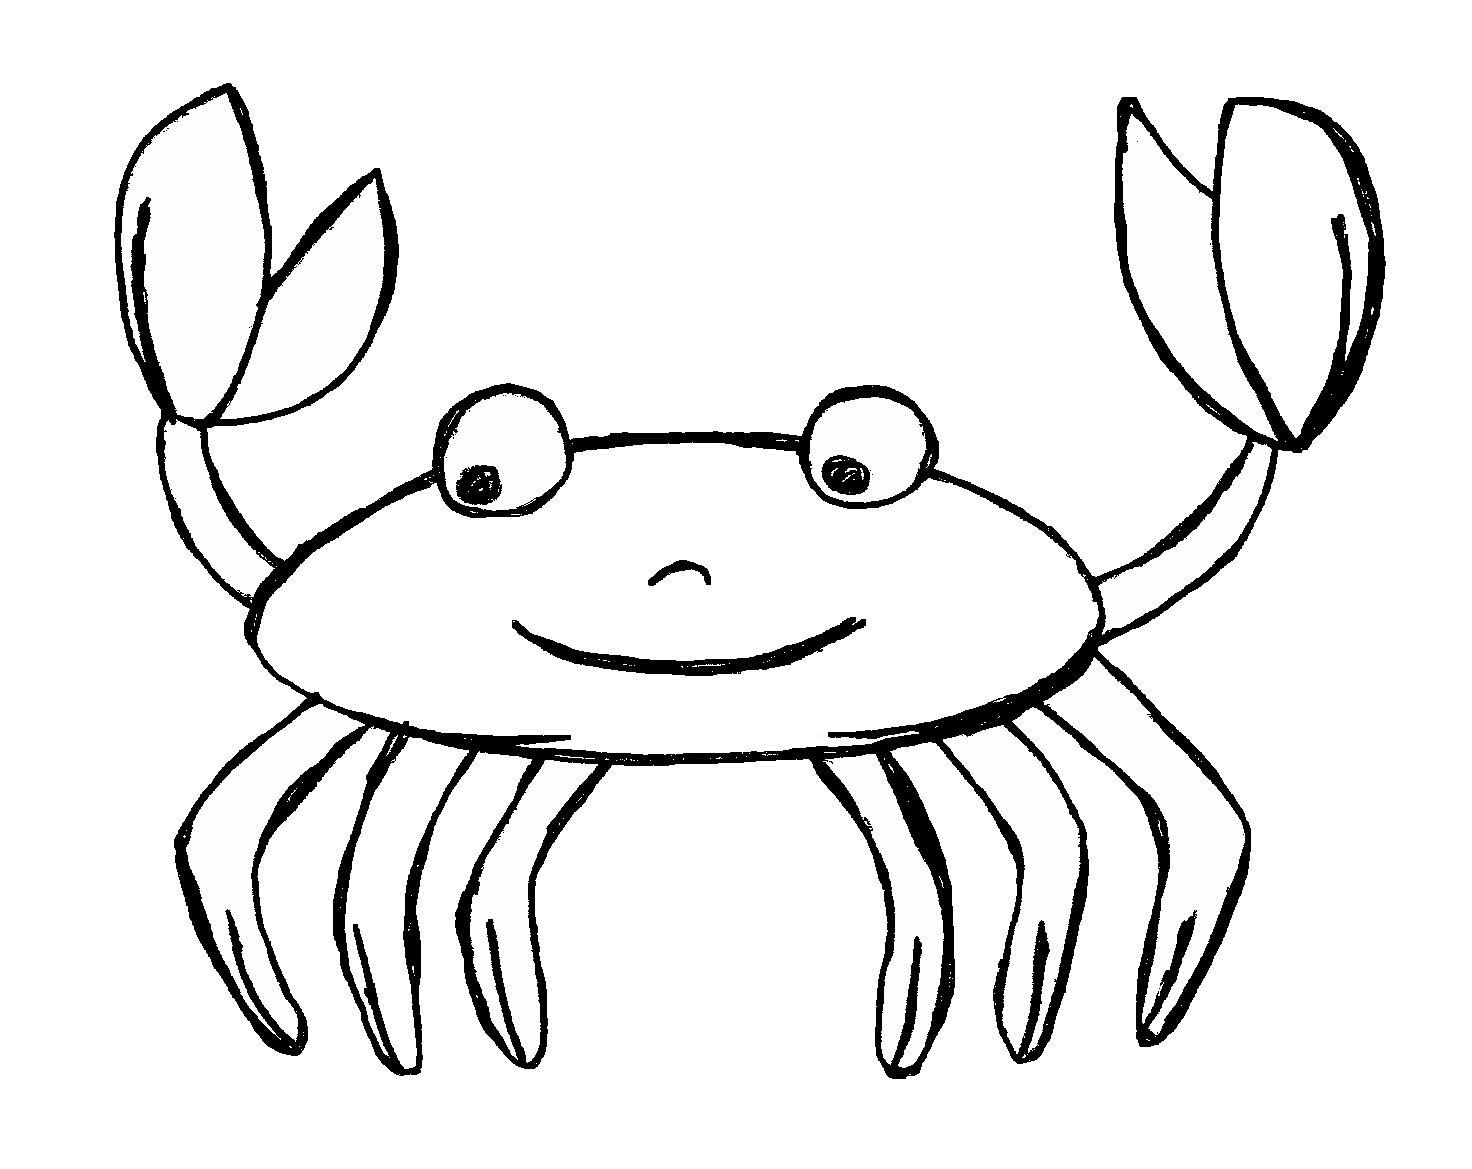 PNG Crab Black And White - 133455